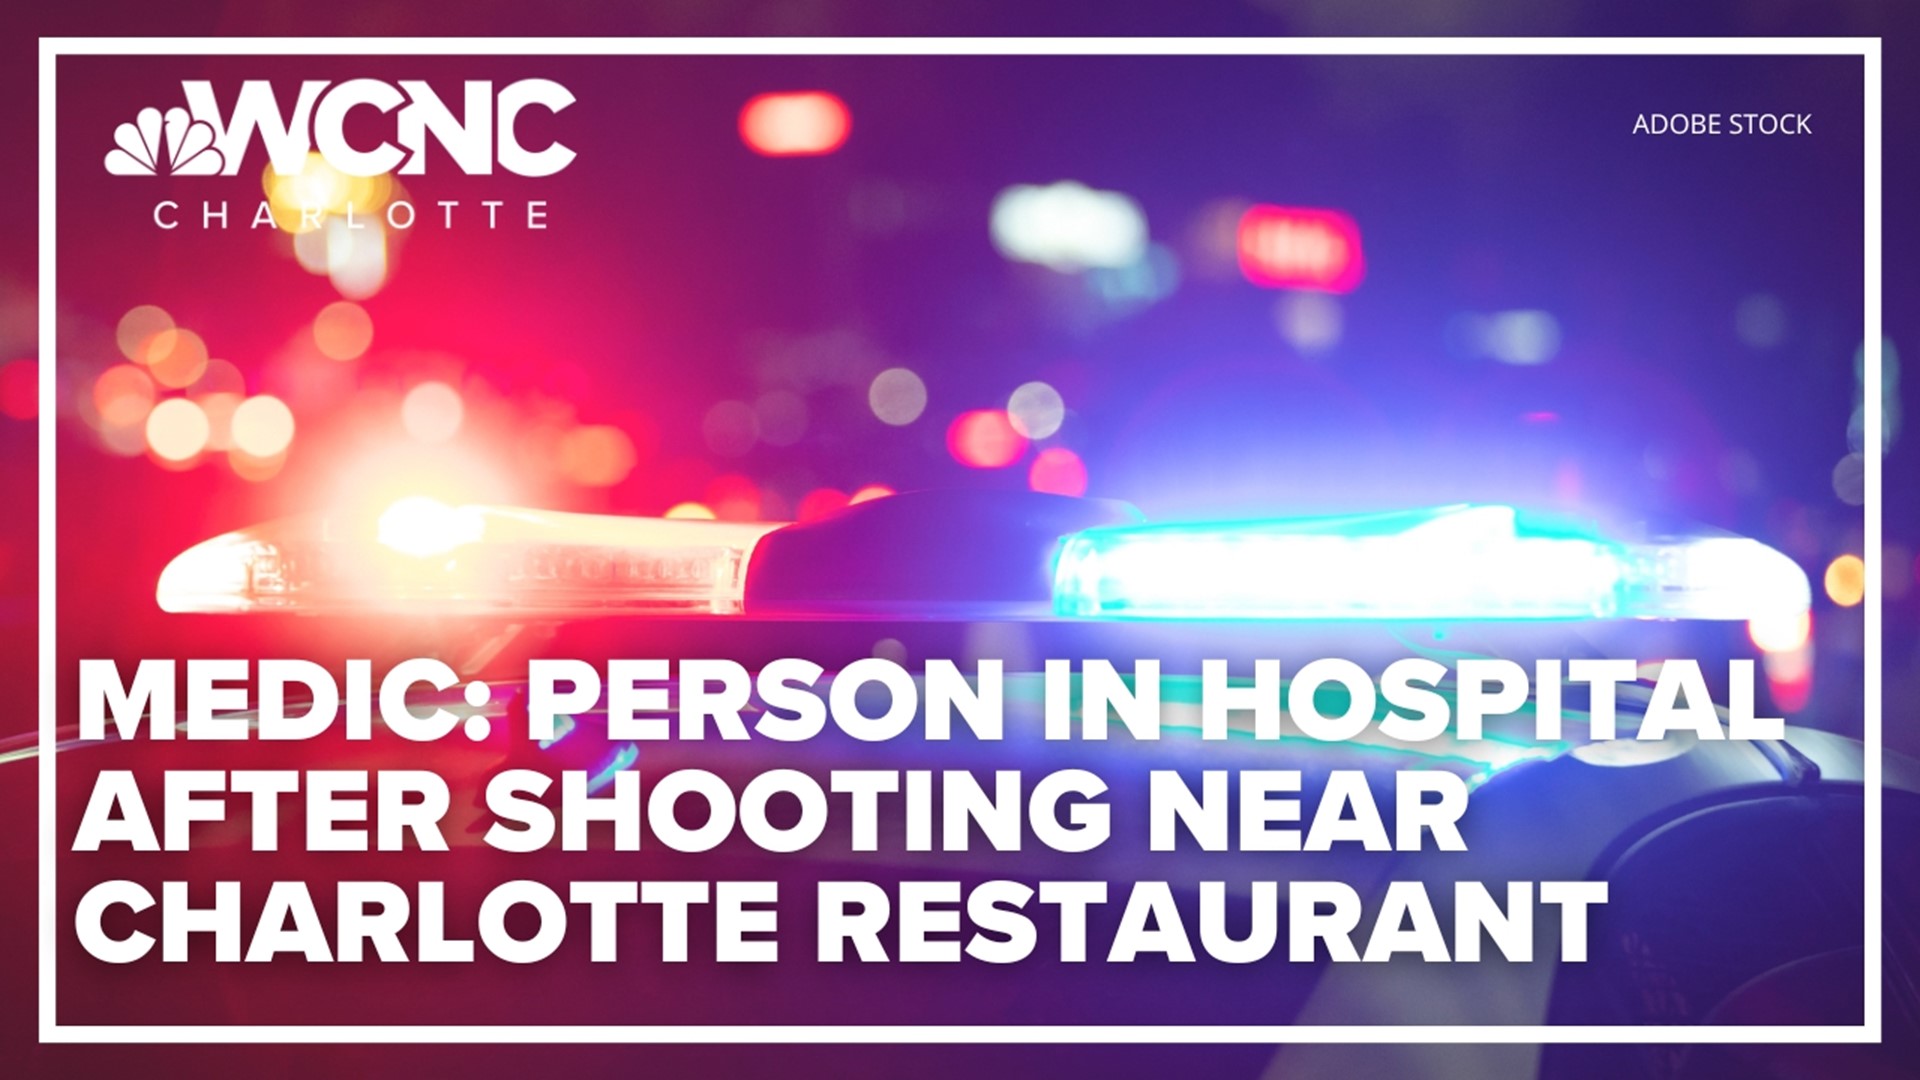 The agency said it happened around 9 p.m. near the Showmars restaurant on South Tryon Street near Steele Creek Road